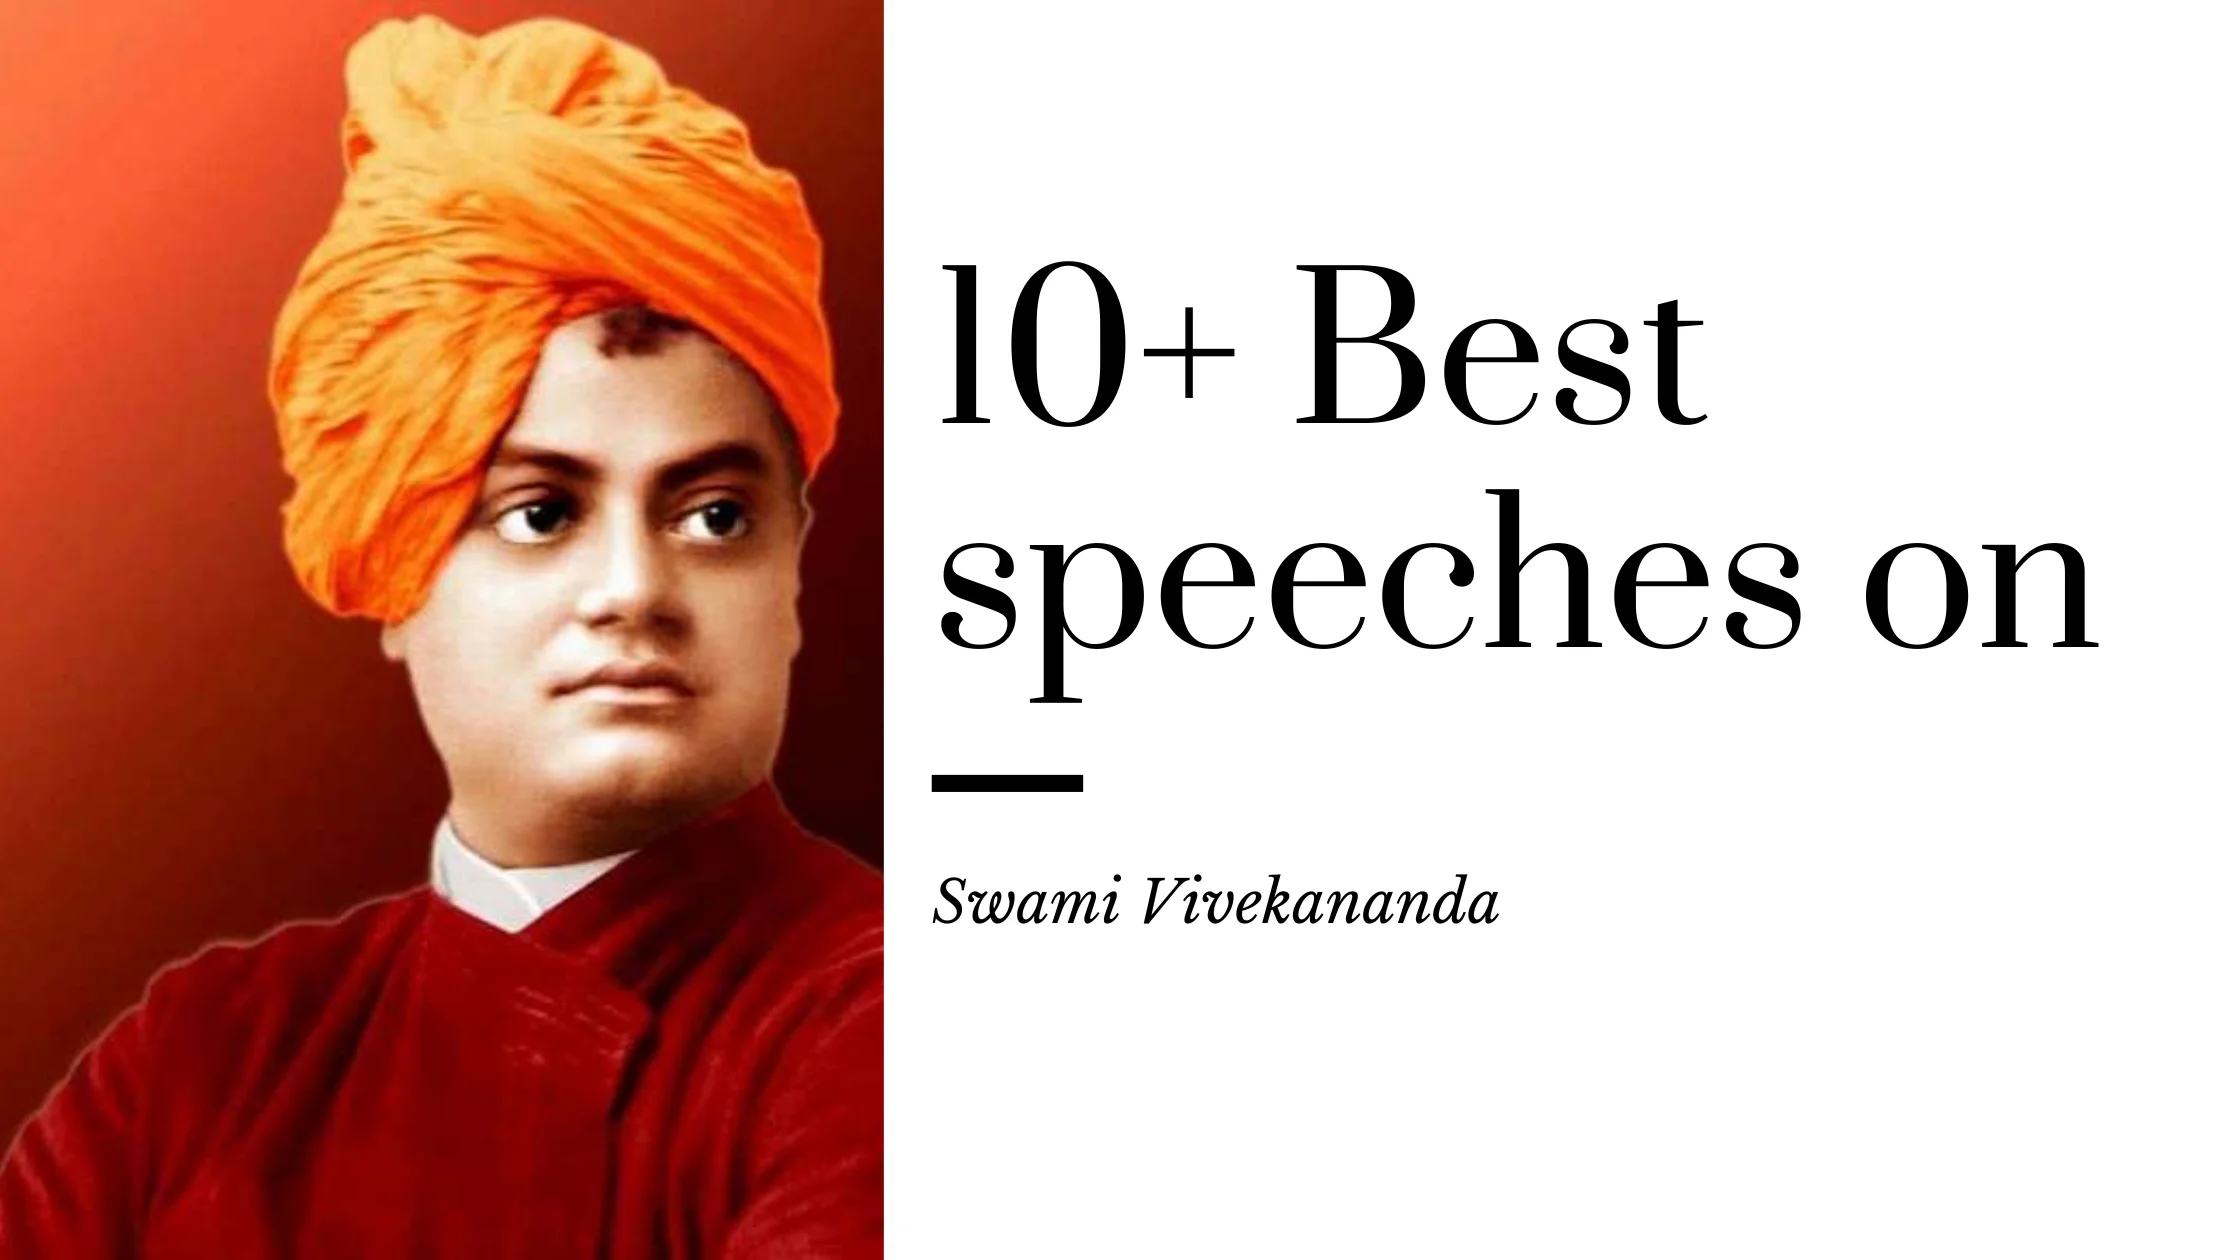 Swami Vivekananda Speech in English : A Collection of 10+ Powerful Speeches